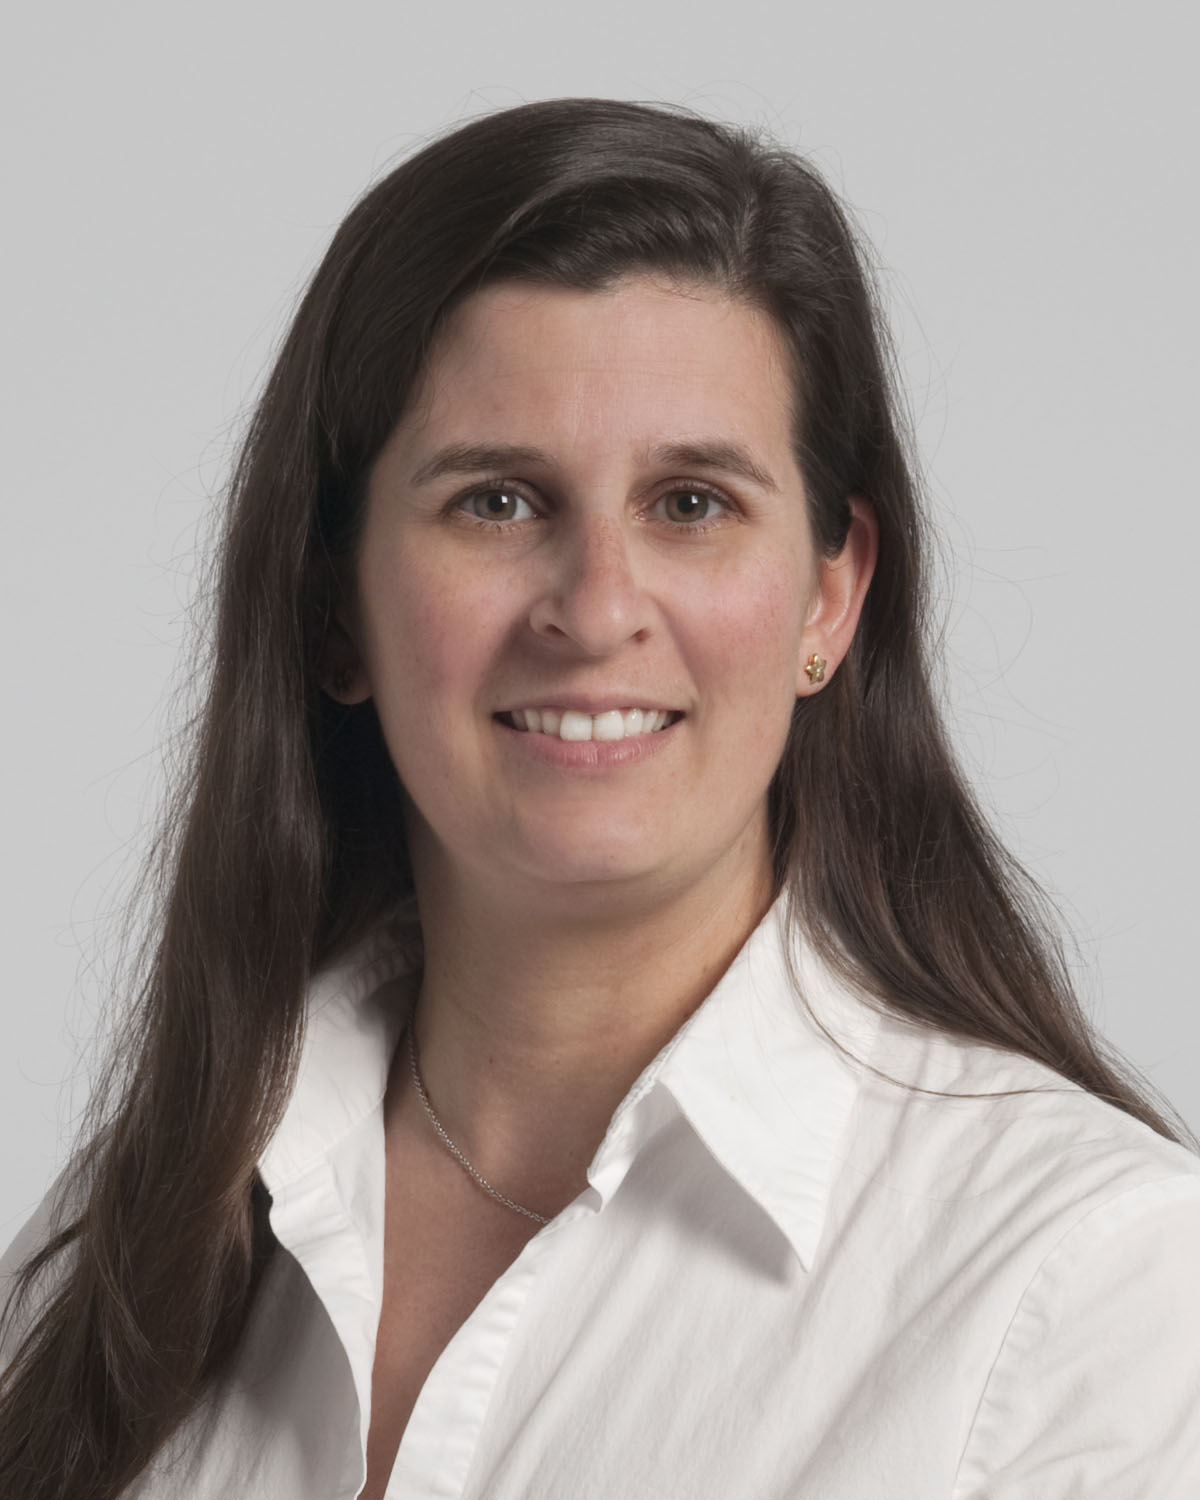 Lara Danziger-Isakov MD, MPH, Director of Immunocompromised Host Infectious Disease at the Cincinnati Children’s Hospital Medical Center in Cincinnati, has been elected President-Elect of the International Society for Heart and Lung Transplantation (ISHLT)